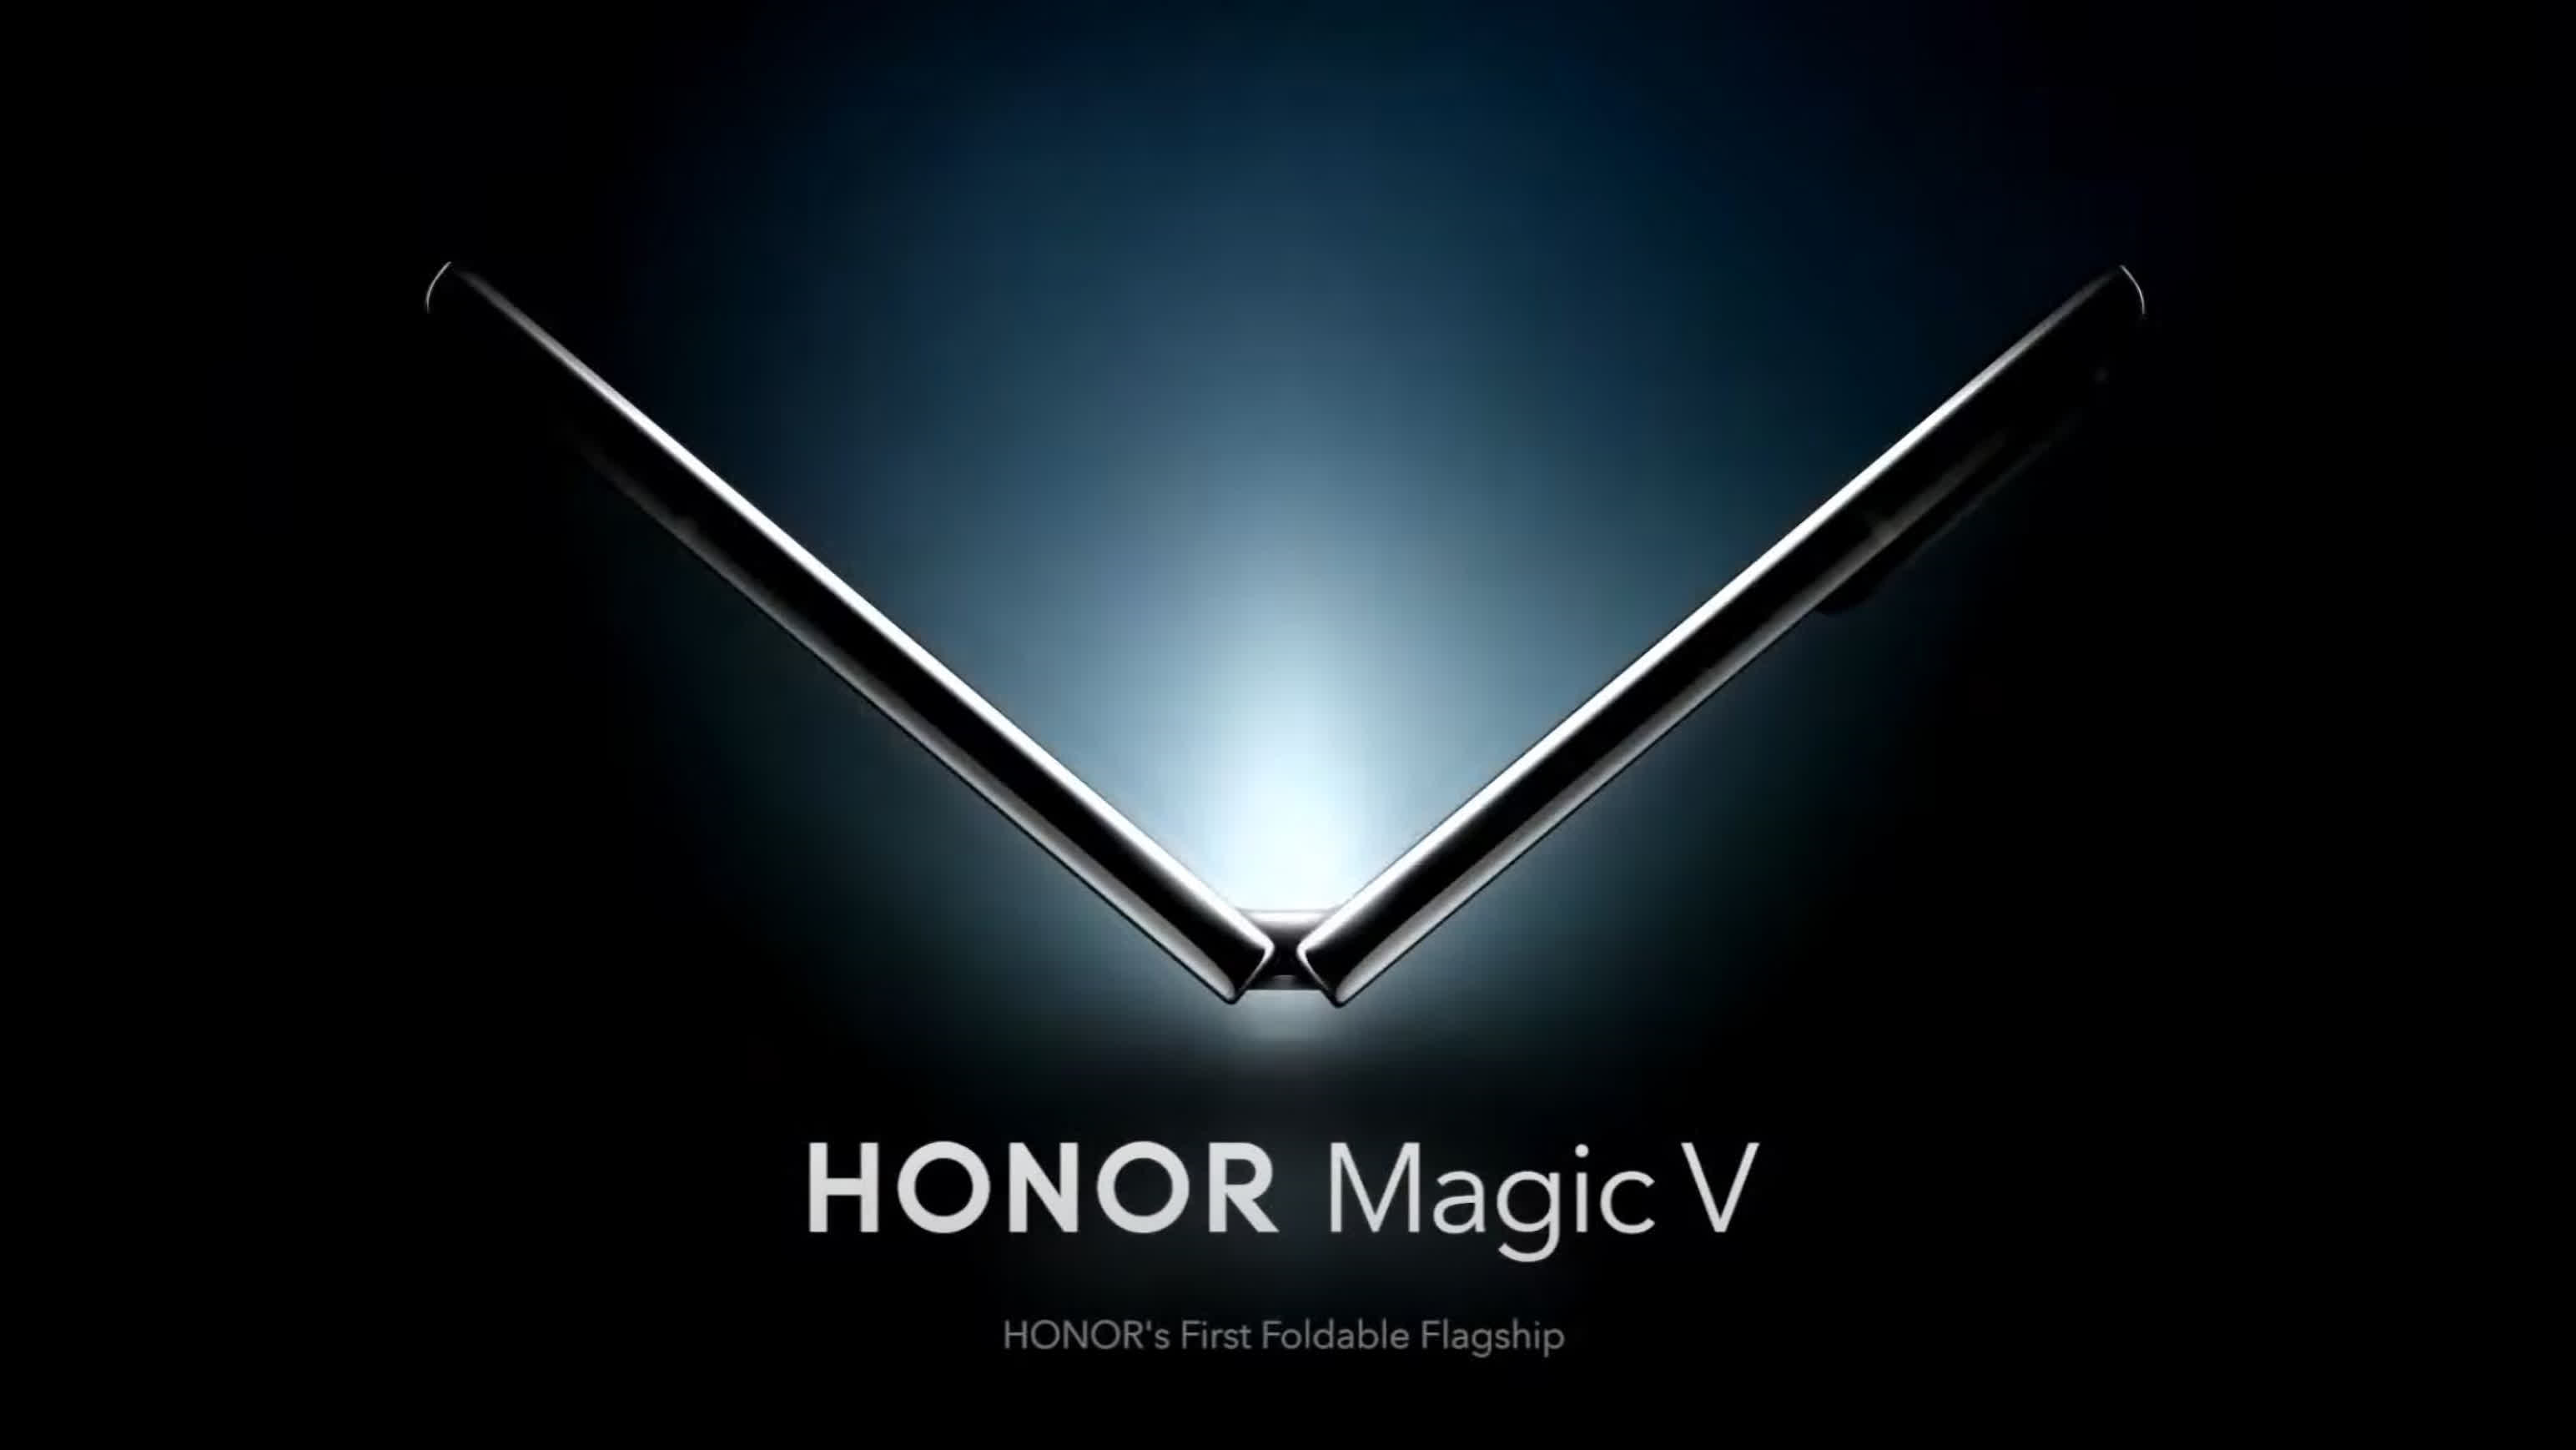 The new Honor Magic V is the company's first foldable phone